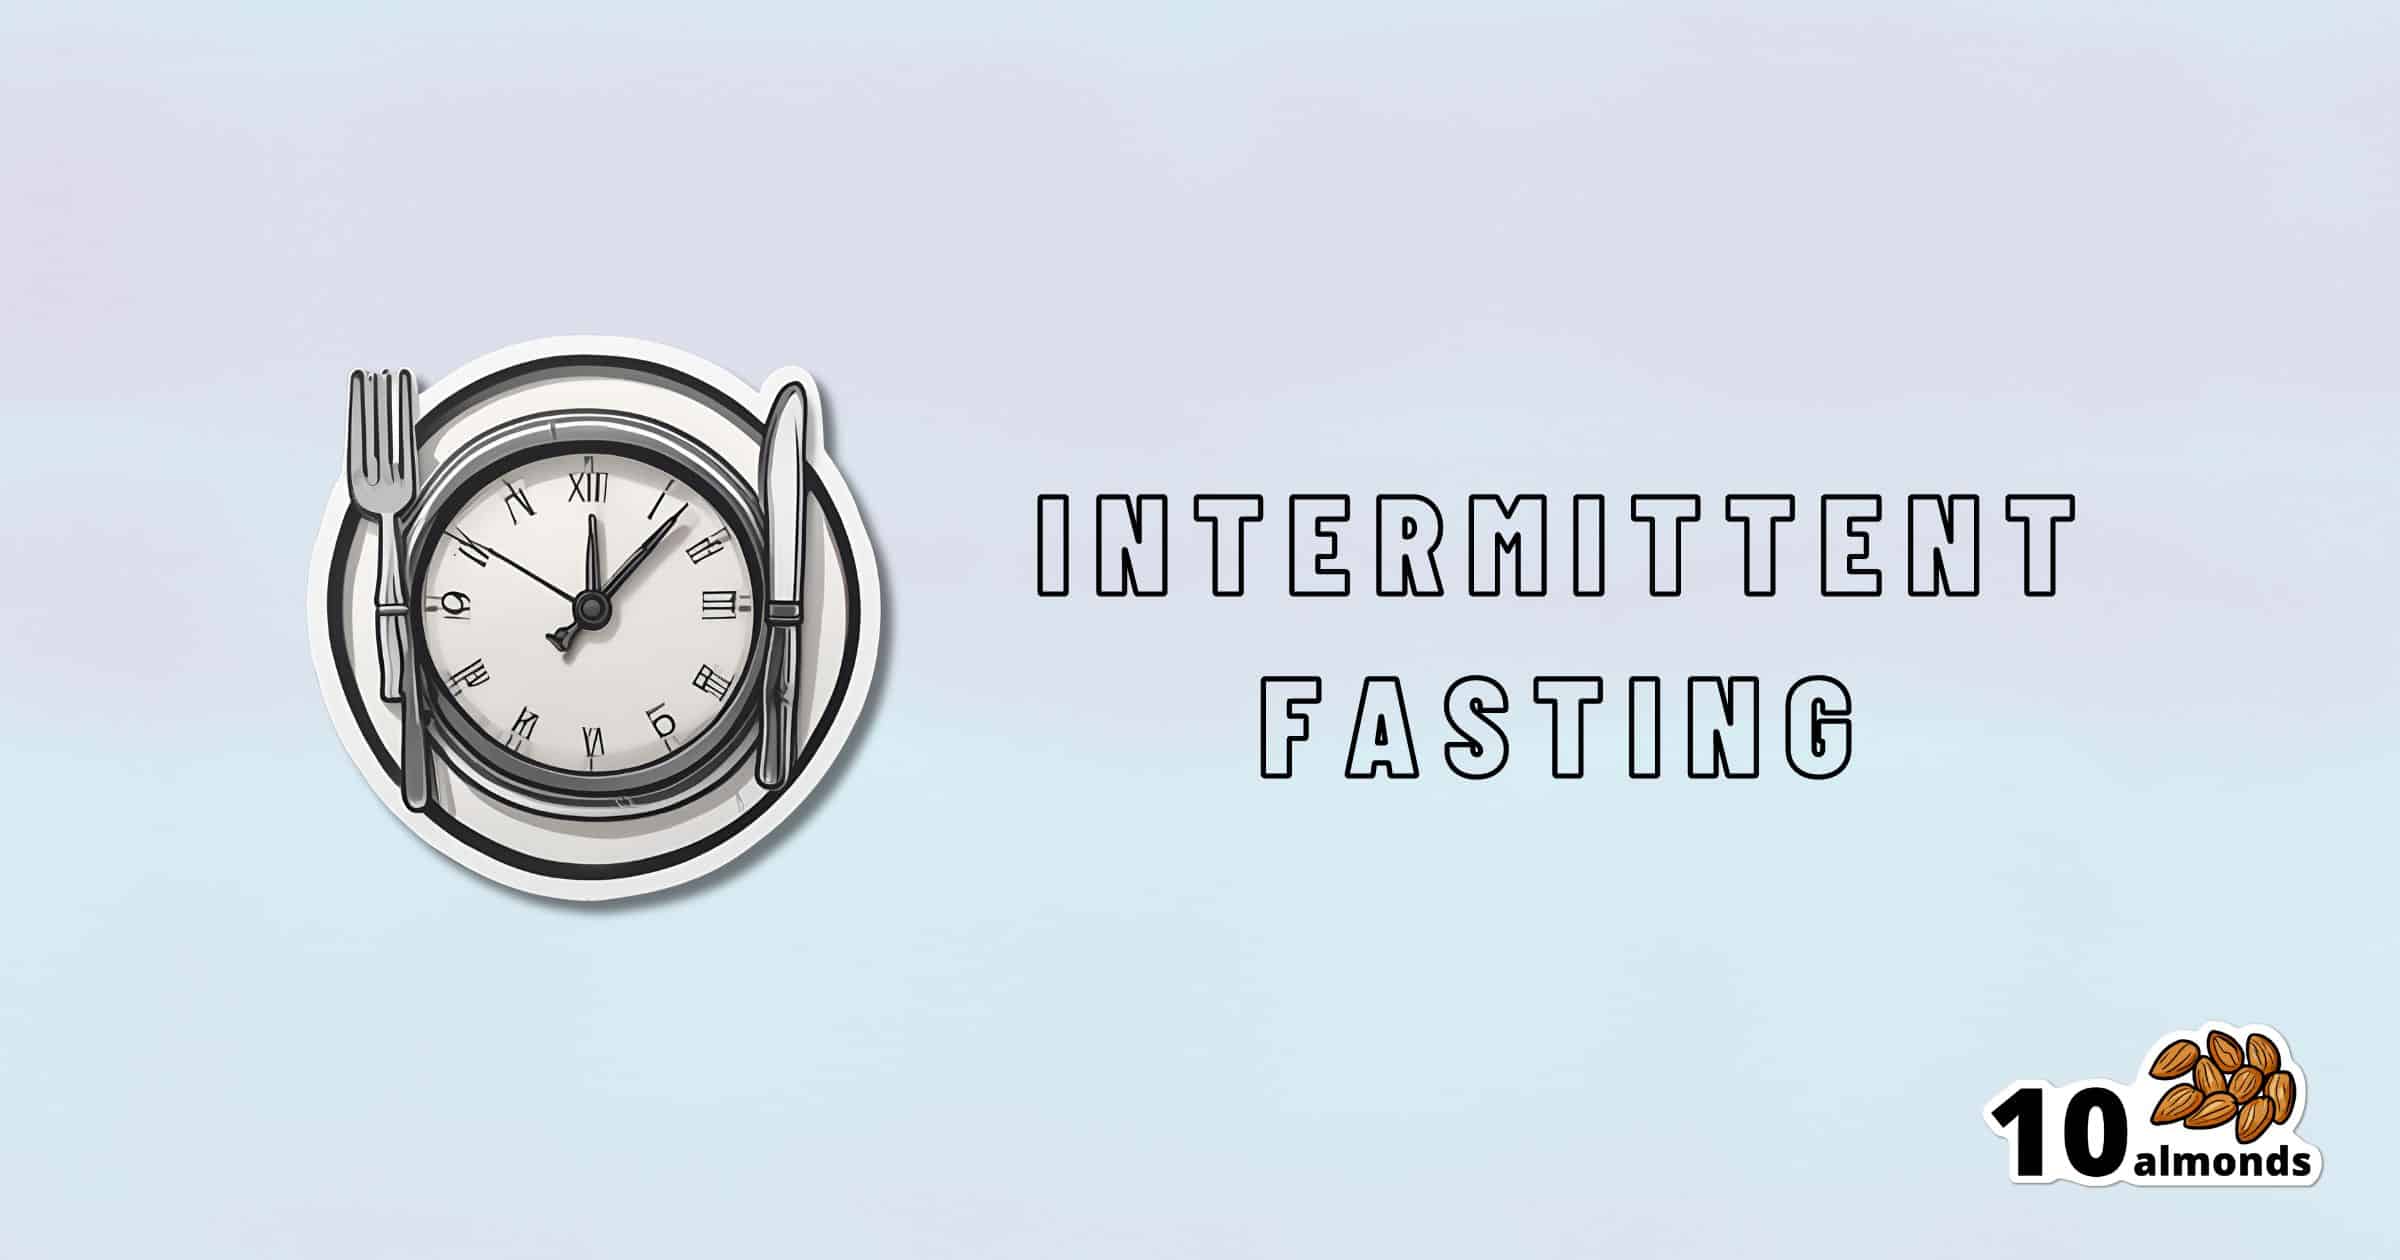 A clock with a fork and knife on either side is depicted on the left side of the image. The words "16/8 Intermittent Fasting" appear to the right of the clock in bold, uppercase letters, perfect for beginners. The bottom right corner features the "10 almonds" logo with images of almonds.